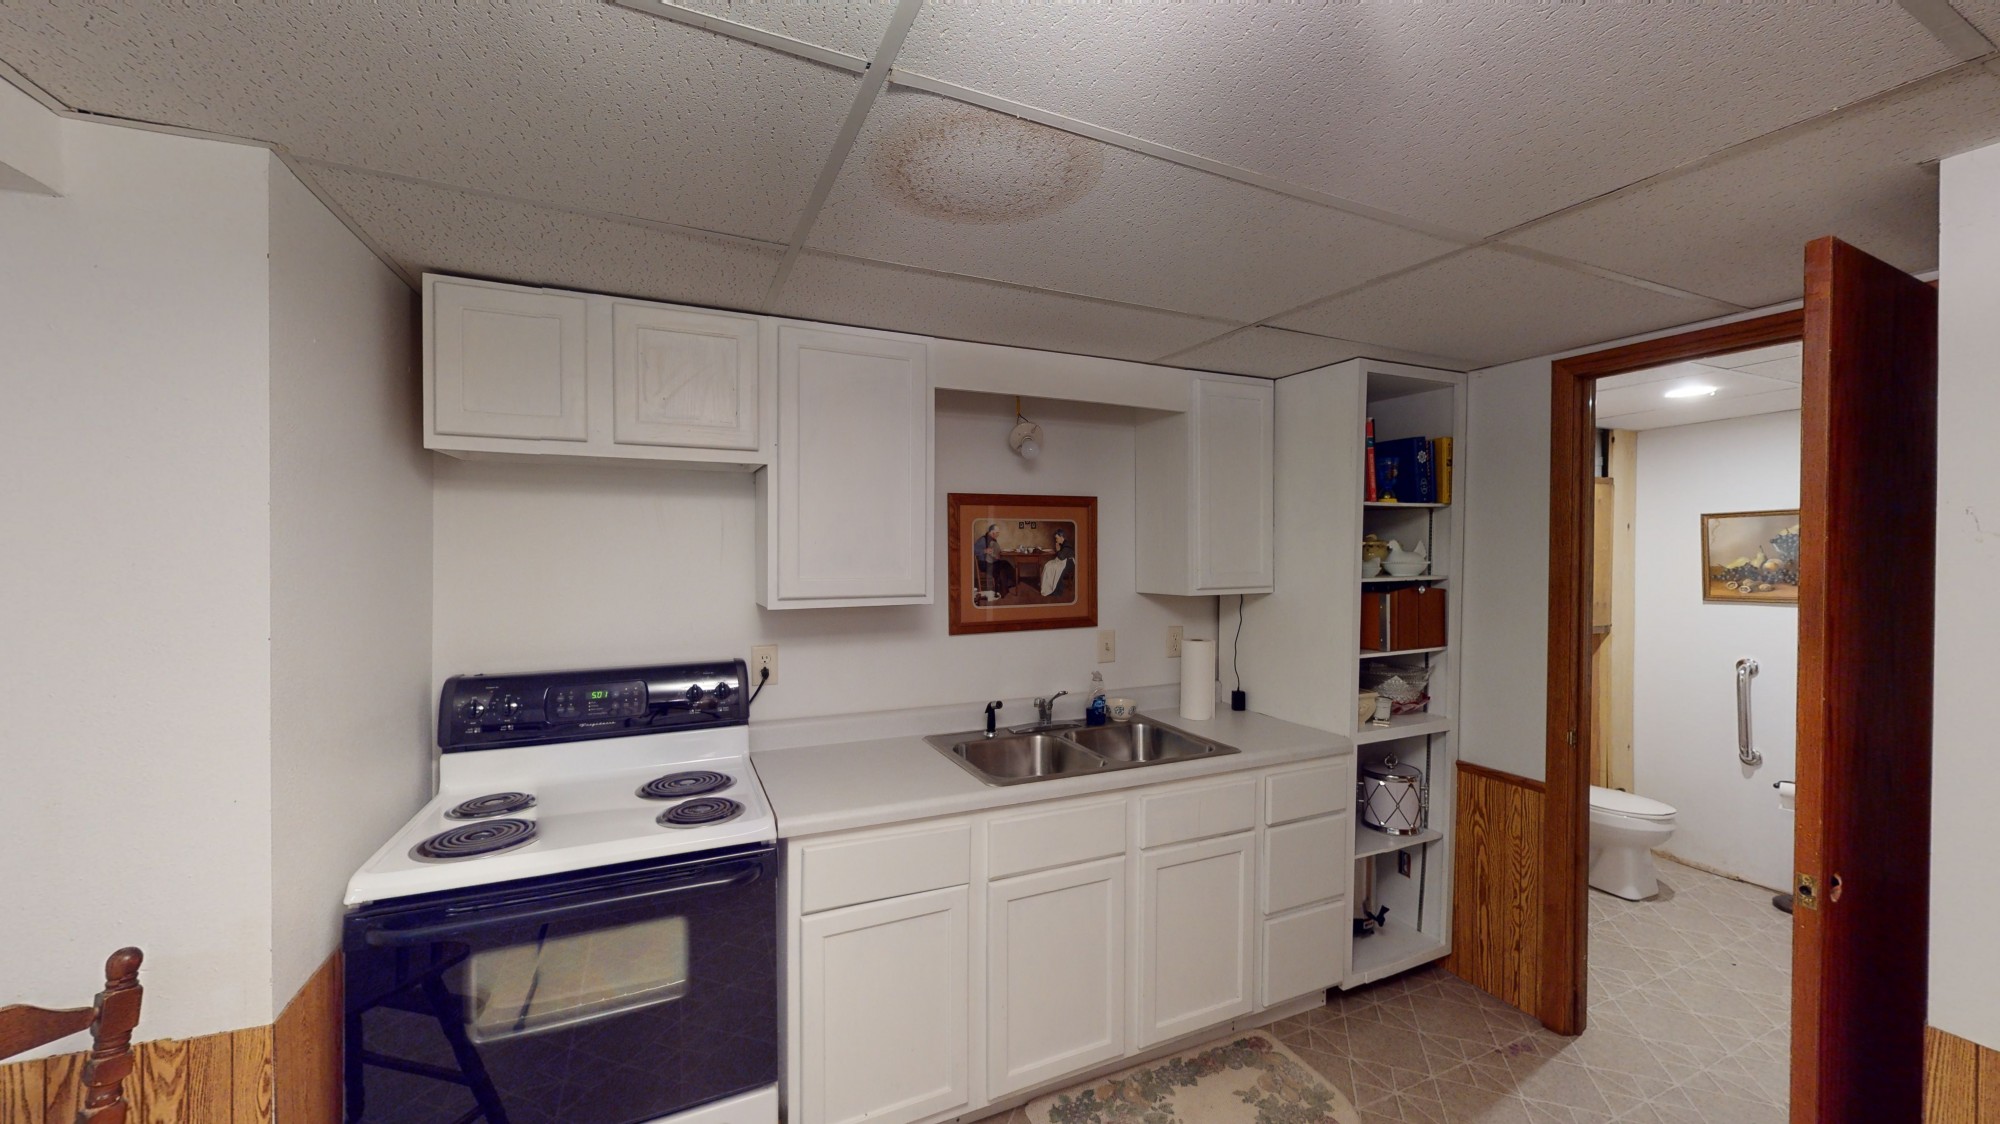 Kitchen
Partially Finished Basement 